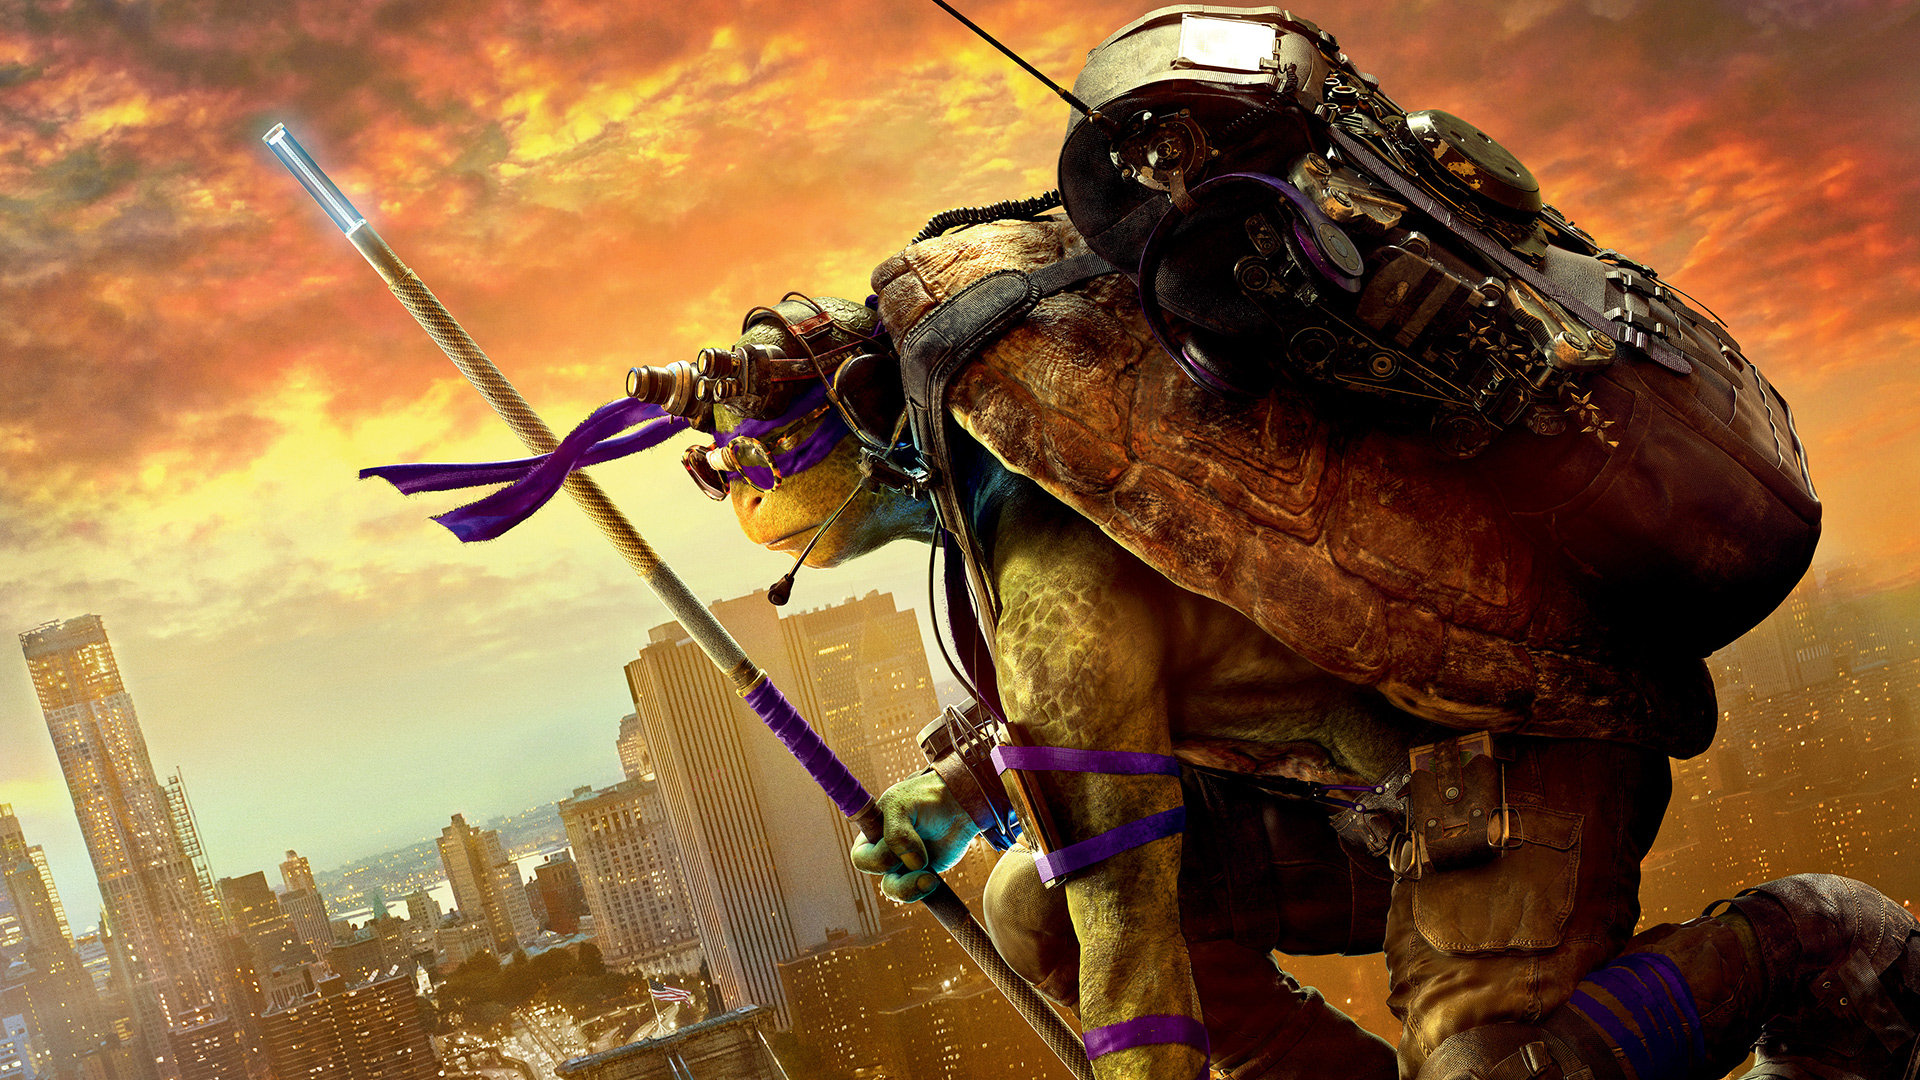 Awesome Teenage Mutant Ninja Turtles (TMNT): Out Of The Shadows free background ID:161100 for hd 1080p desktop